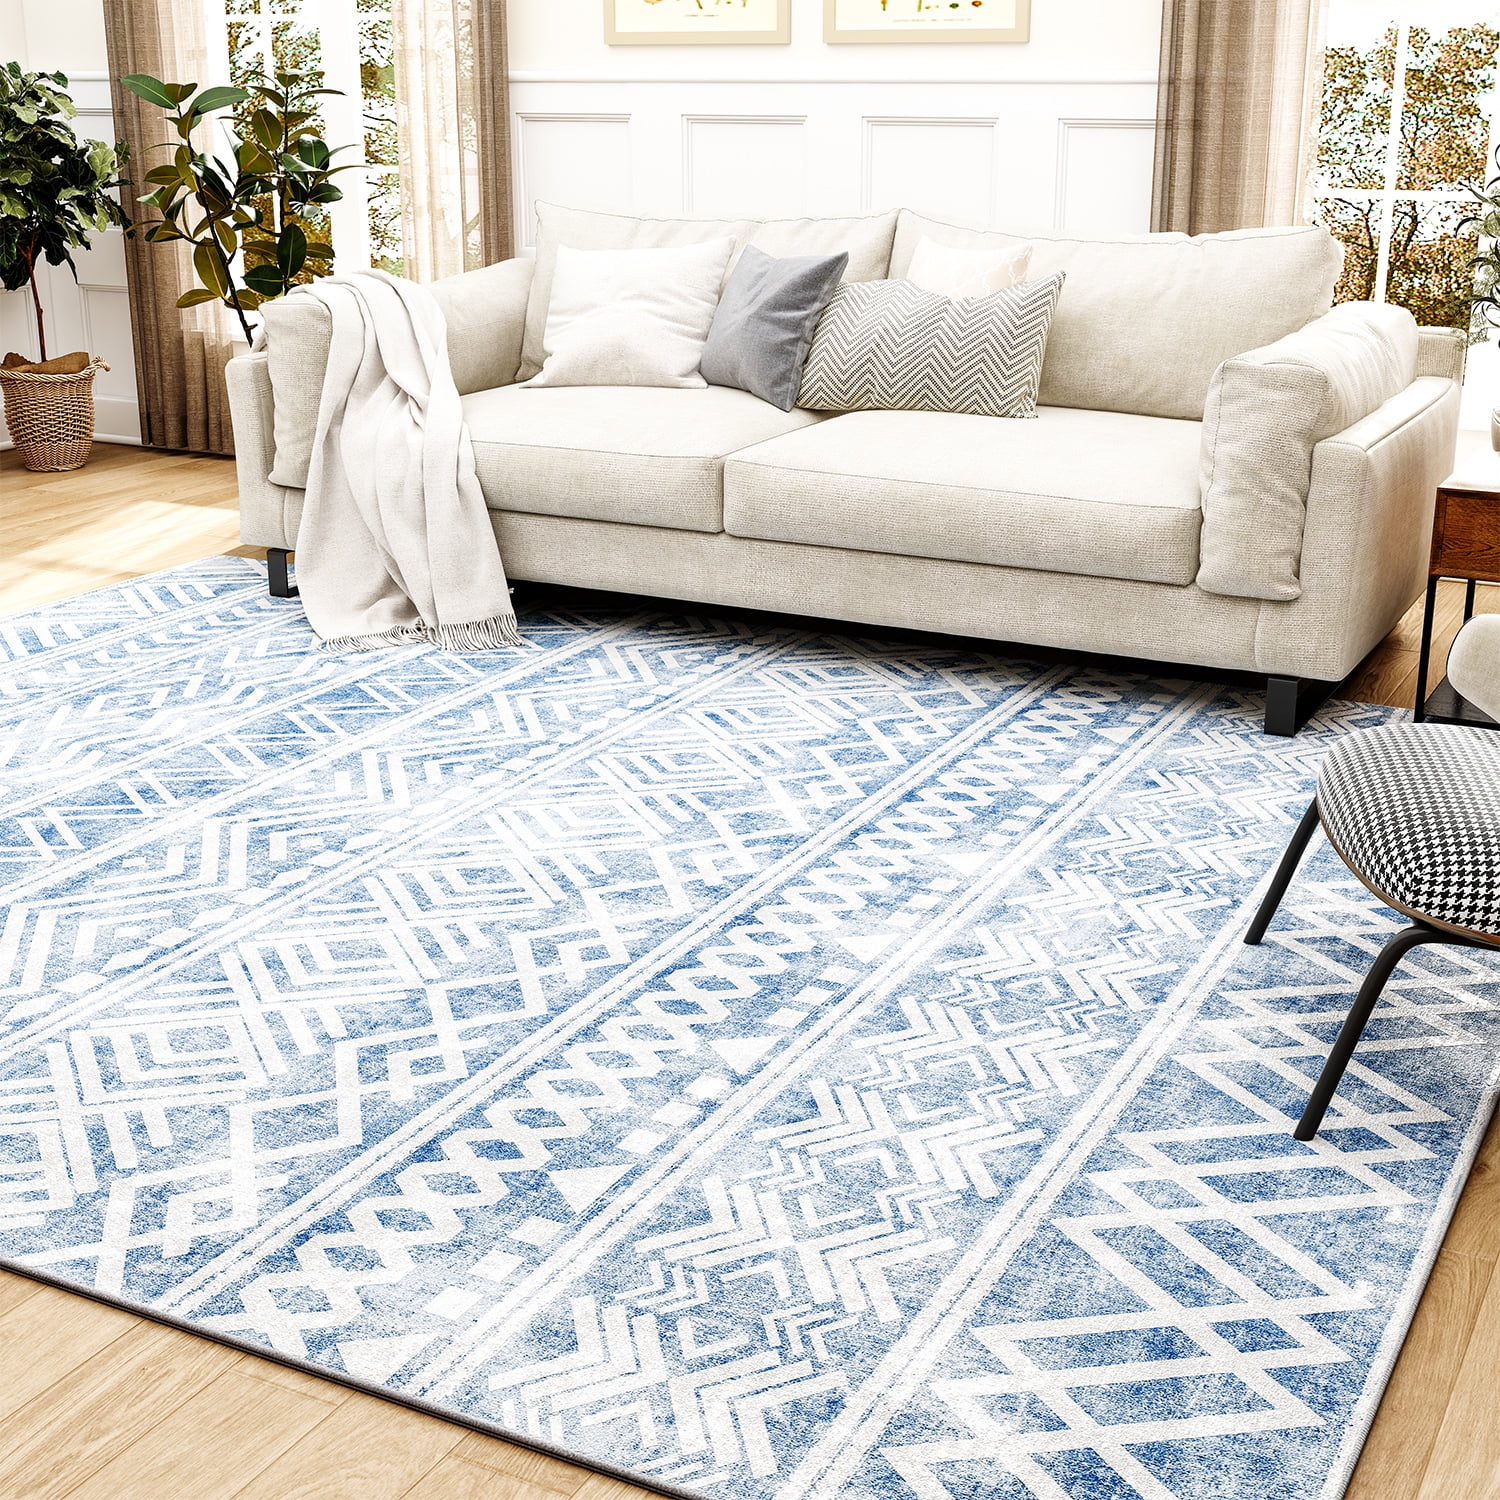 SIXHOME 5'x7' Area Rugs for Living Room Modern Abstract Area Rugs Machine Washable  Rugs Distressed Rugs Bedroom Dining Room Kitchen Carpet Grey 